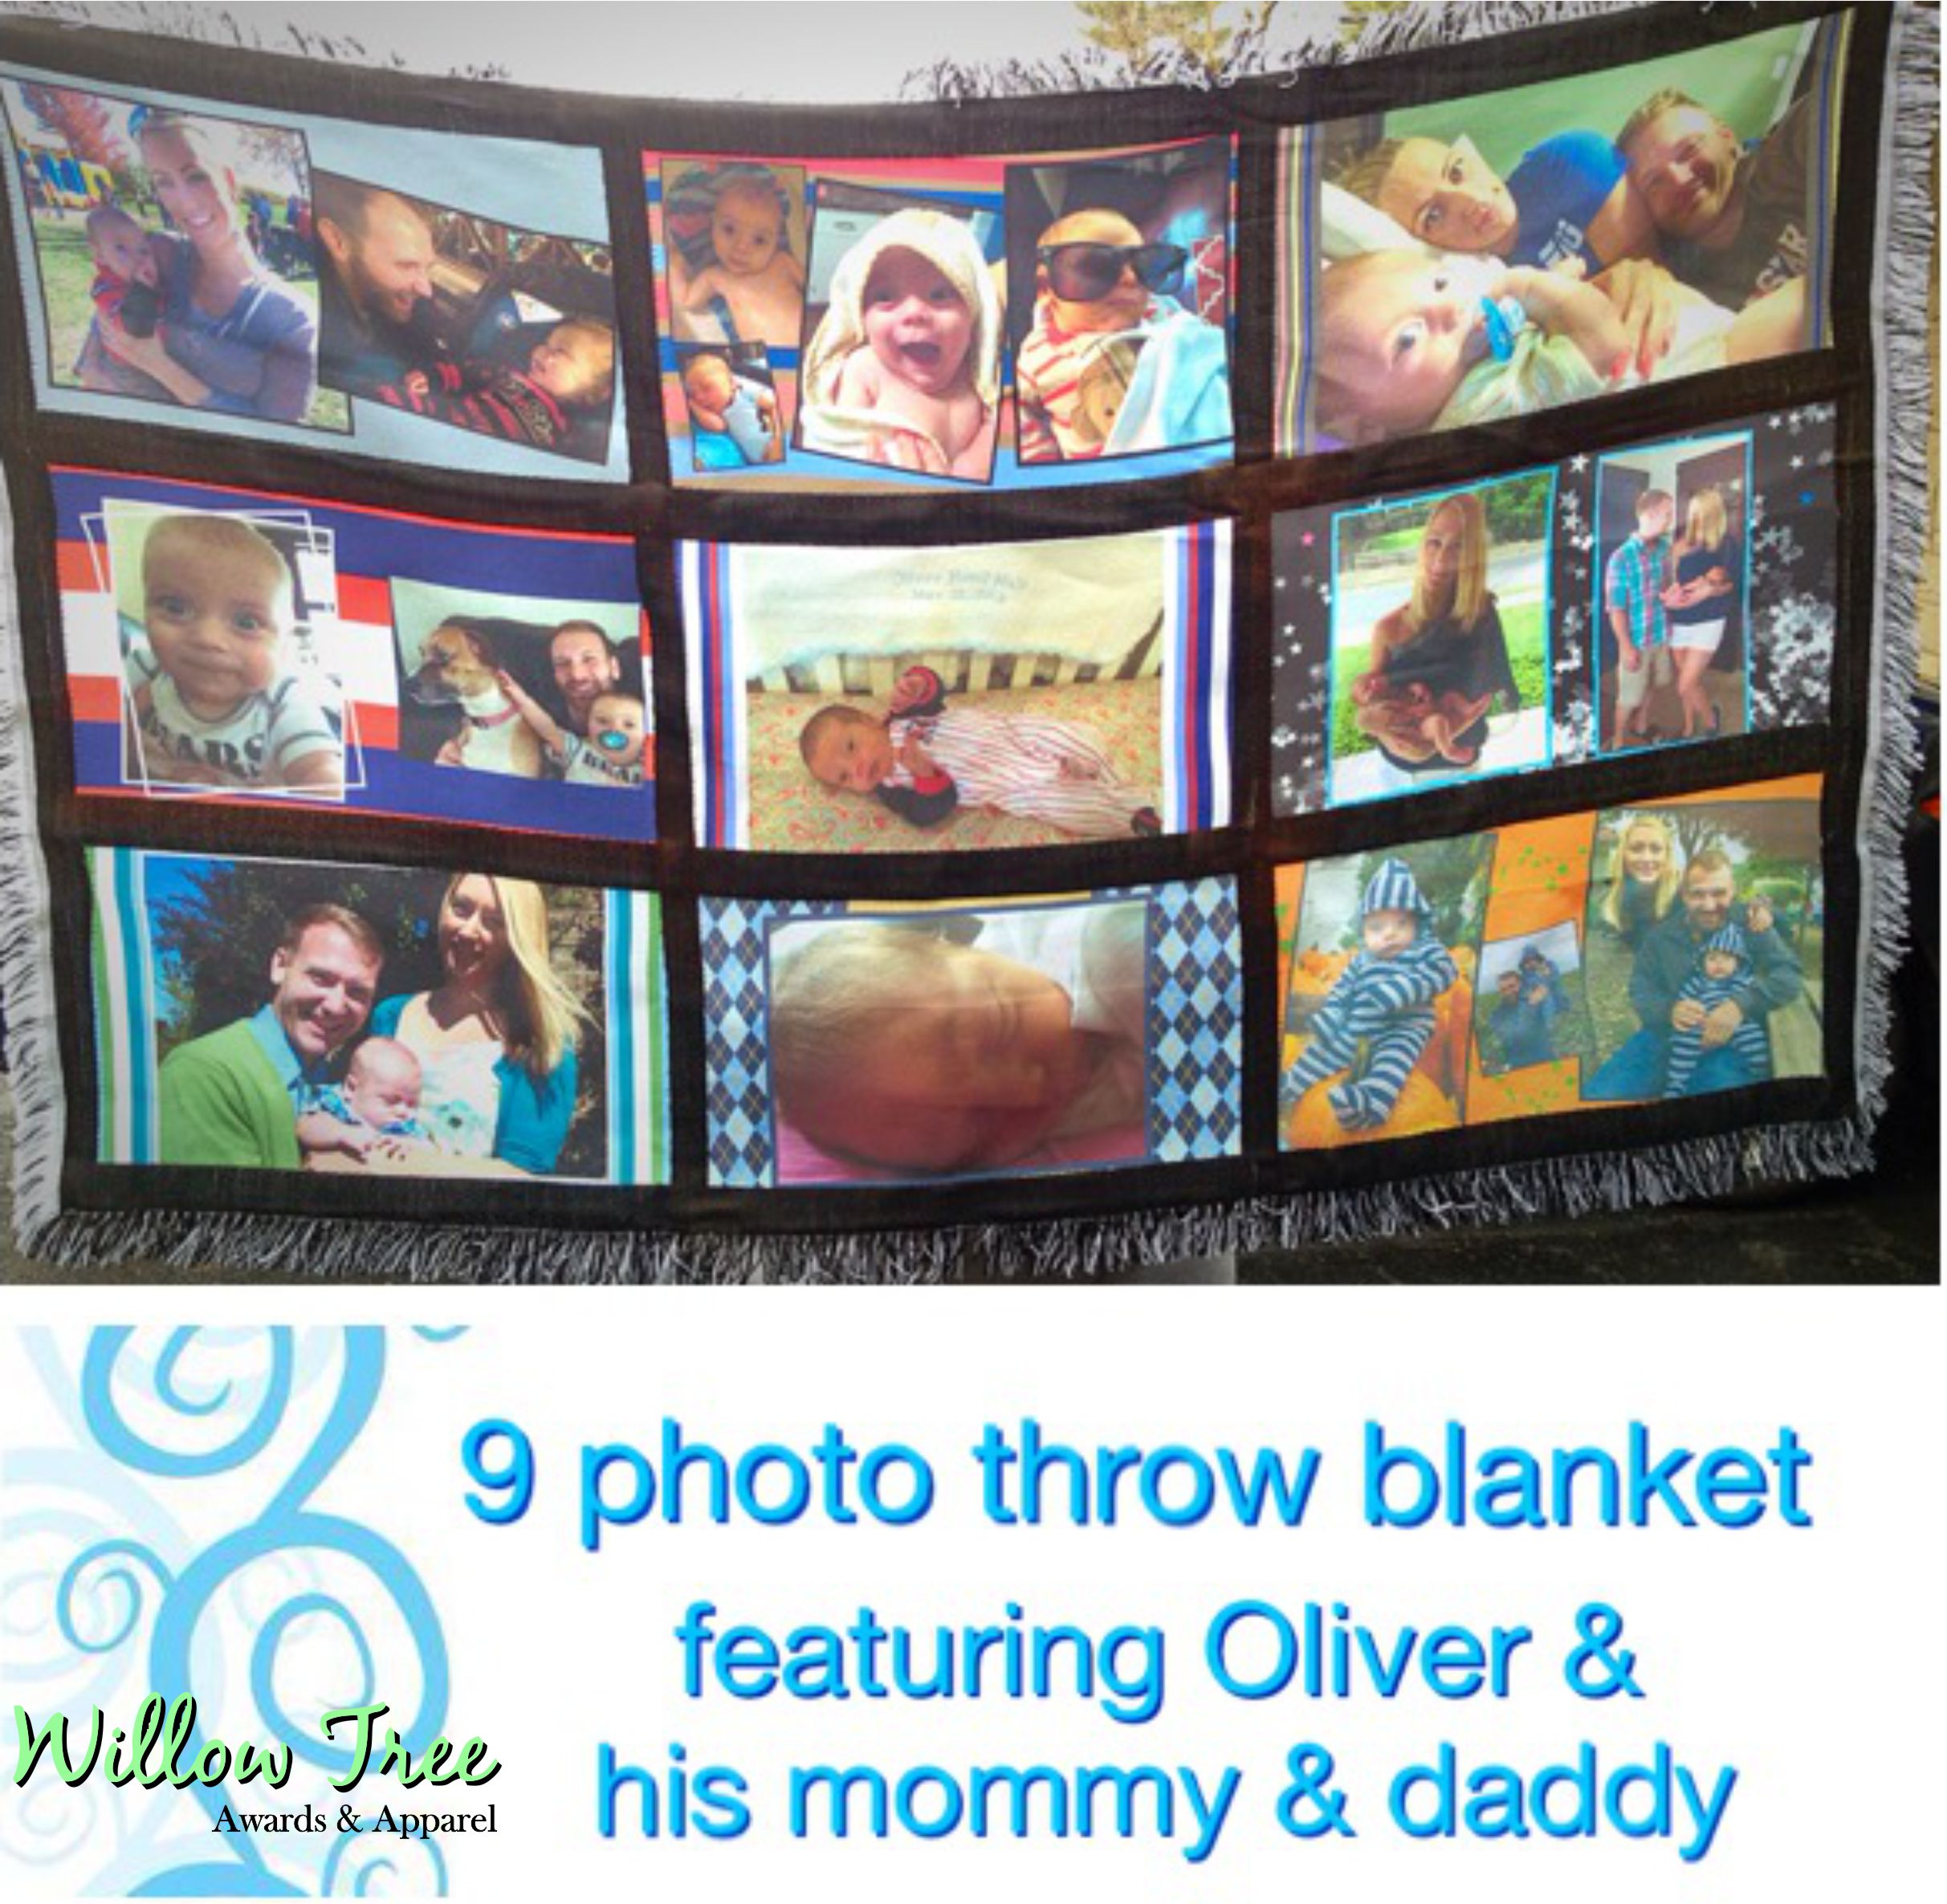 Photo Throw Blanket made with sublimation printing